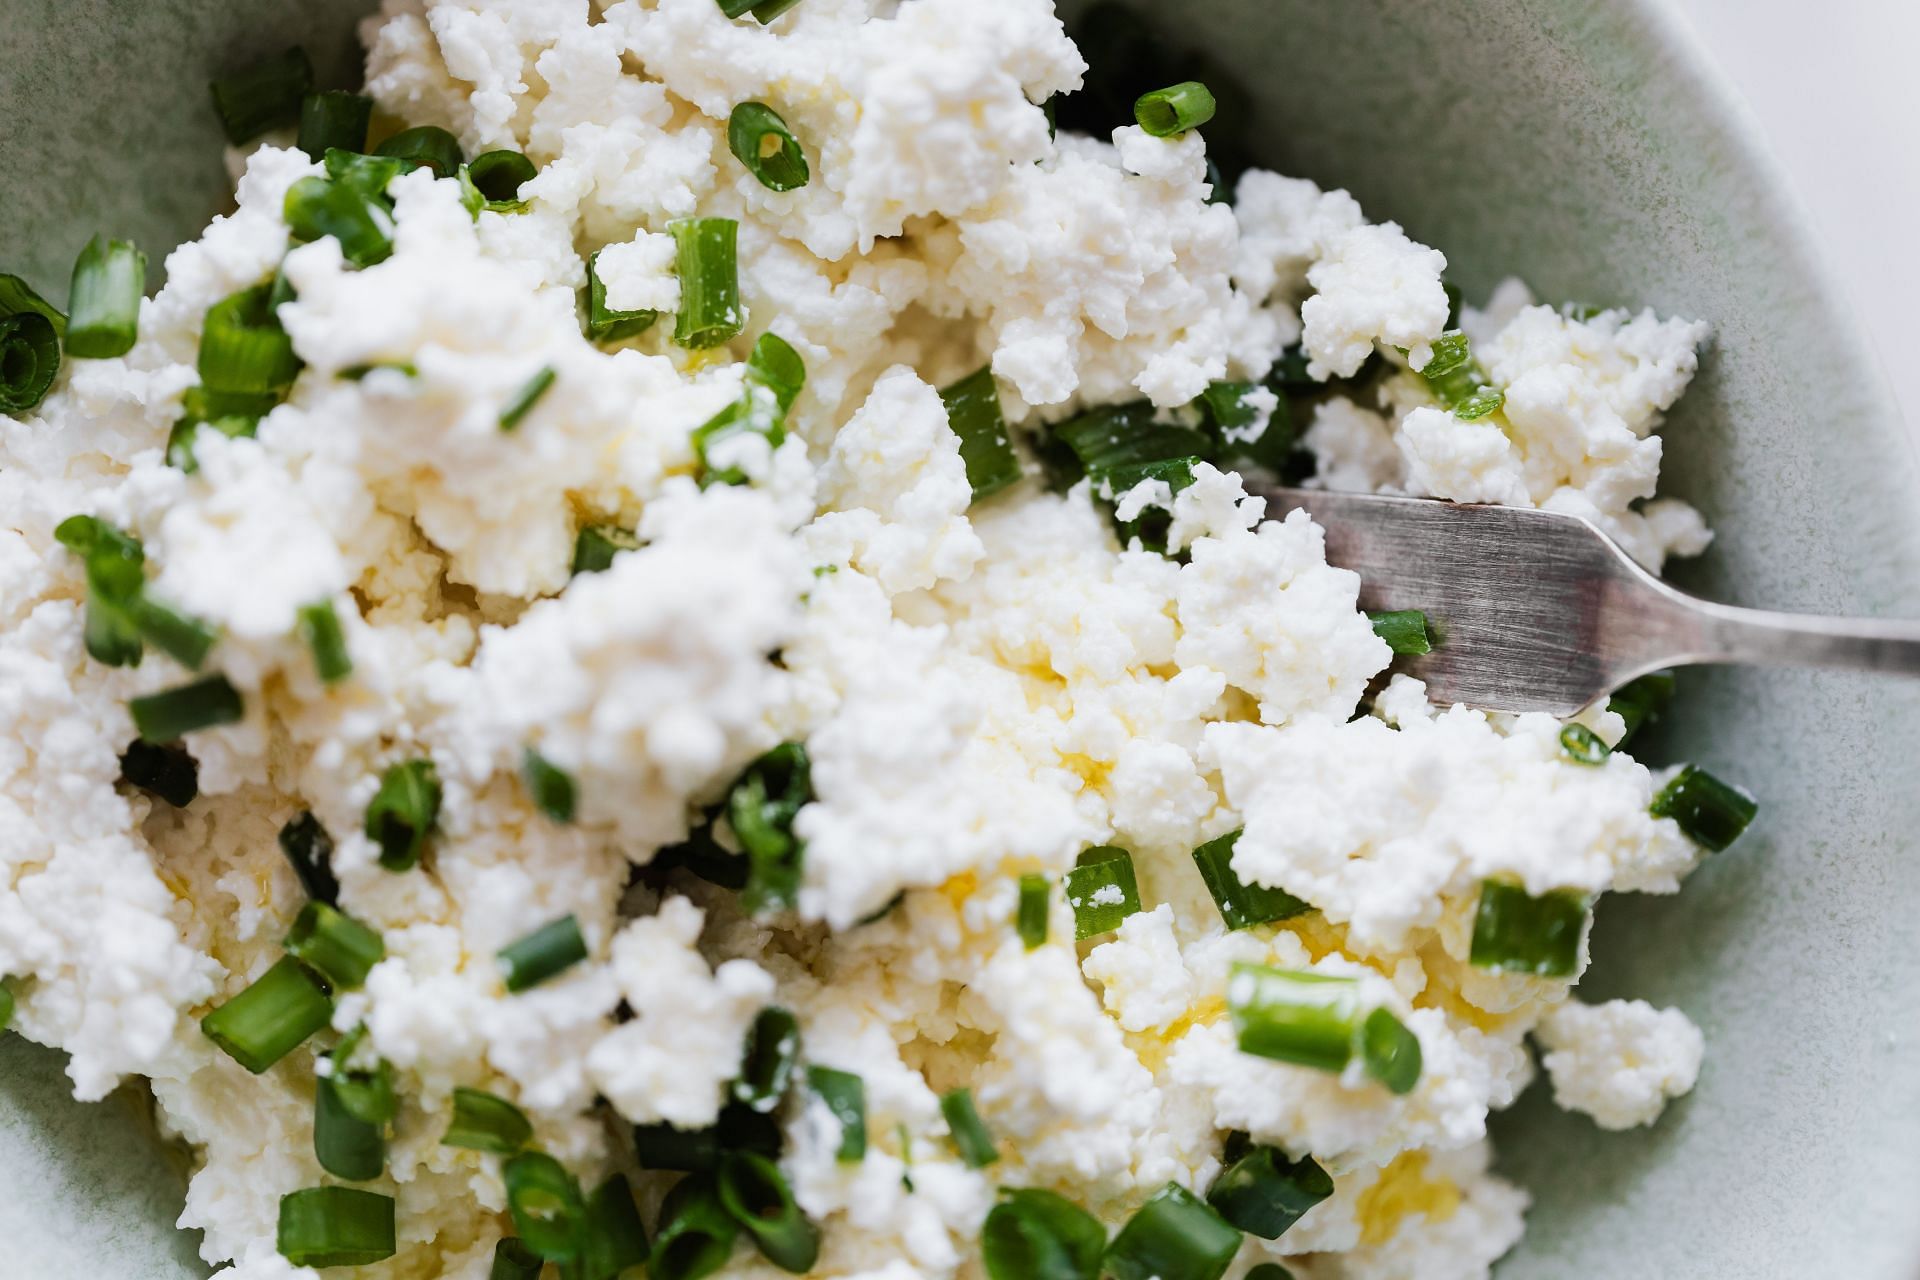 Cottage cheese is beneficial for weight loss &amp; even to build muscles. (Image via Pexels / Karolina Grabowska)